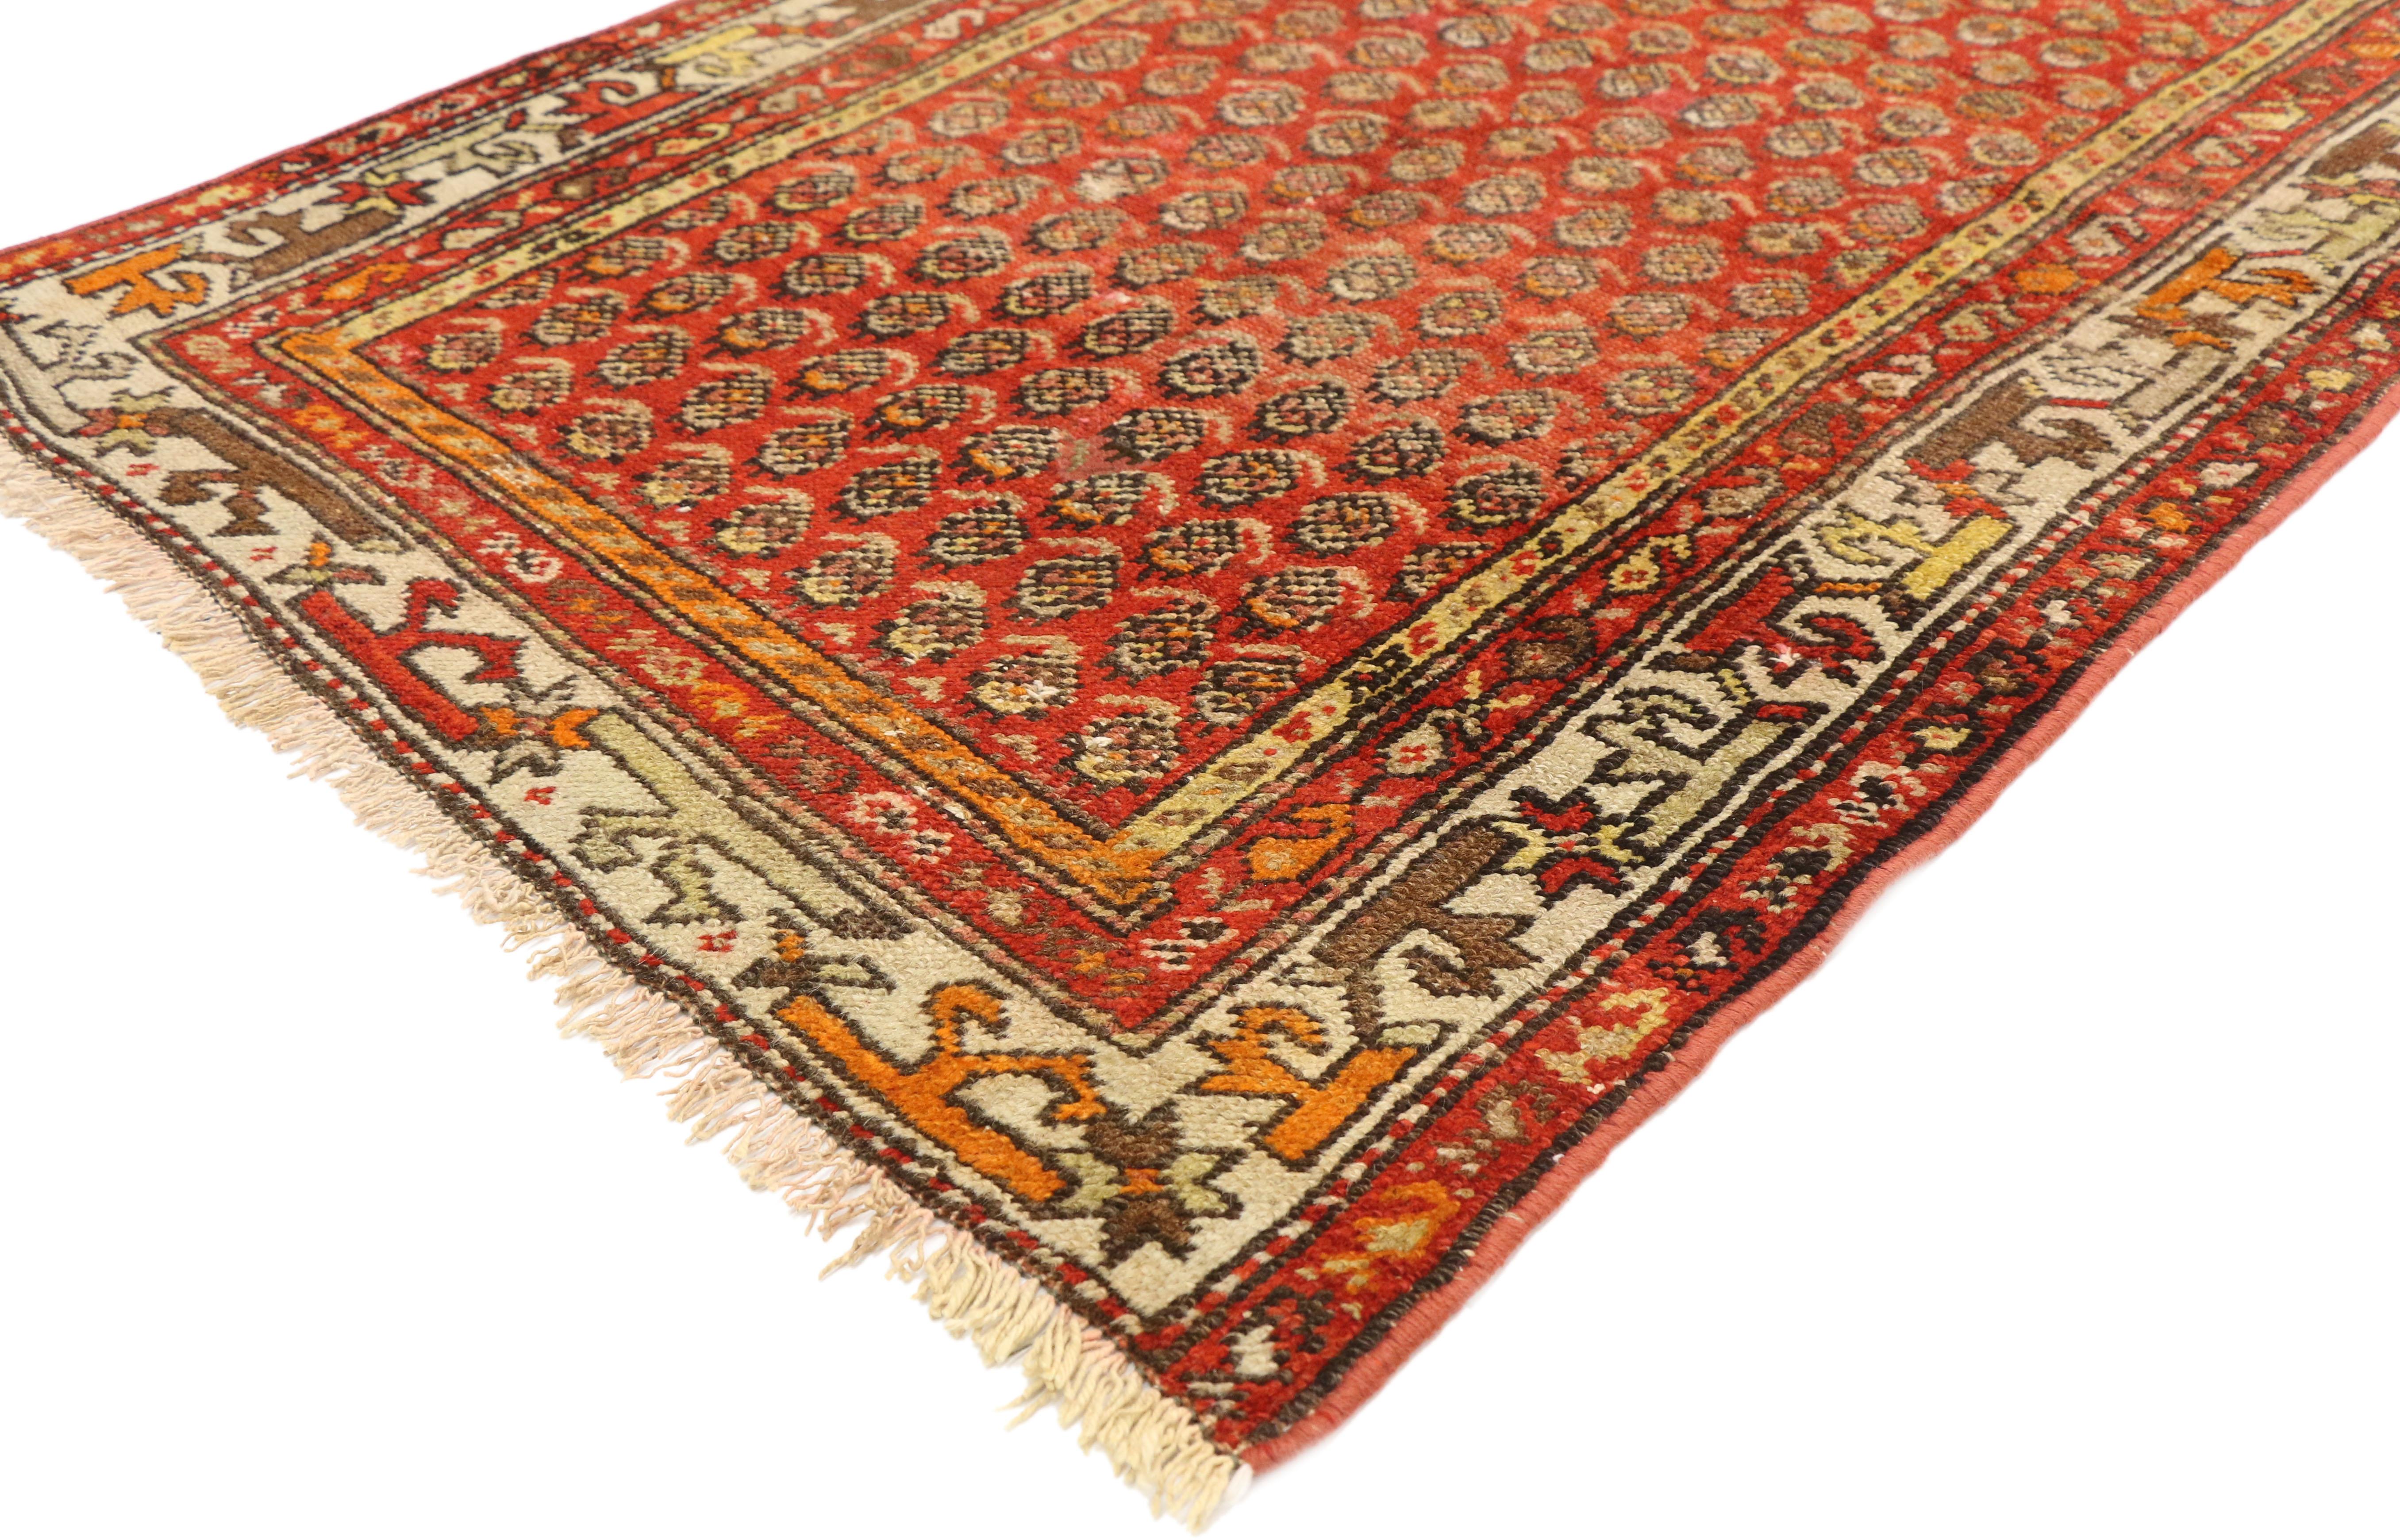 71448, antique Persian Boteh Hamadan accent rug with Tudor house manor style. This hand knotted wool antique Persian Boteh Hamadan rug is vibrant hued with a Classic Boteh pattern throughout an abrashed vermilion backdrop. It is framed by a series